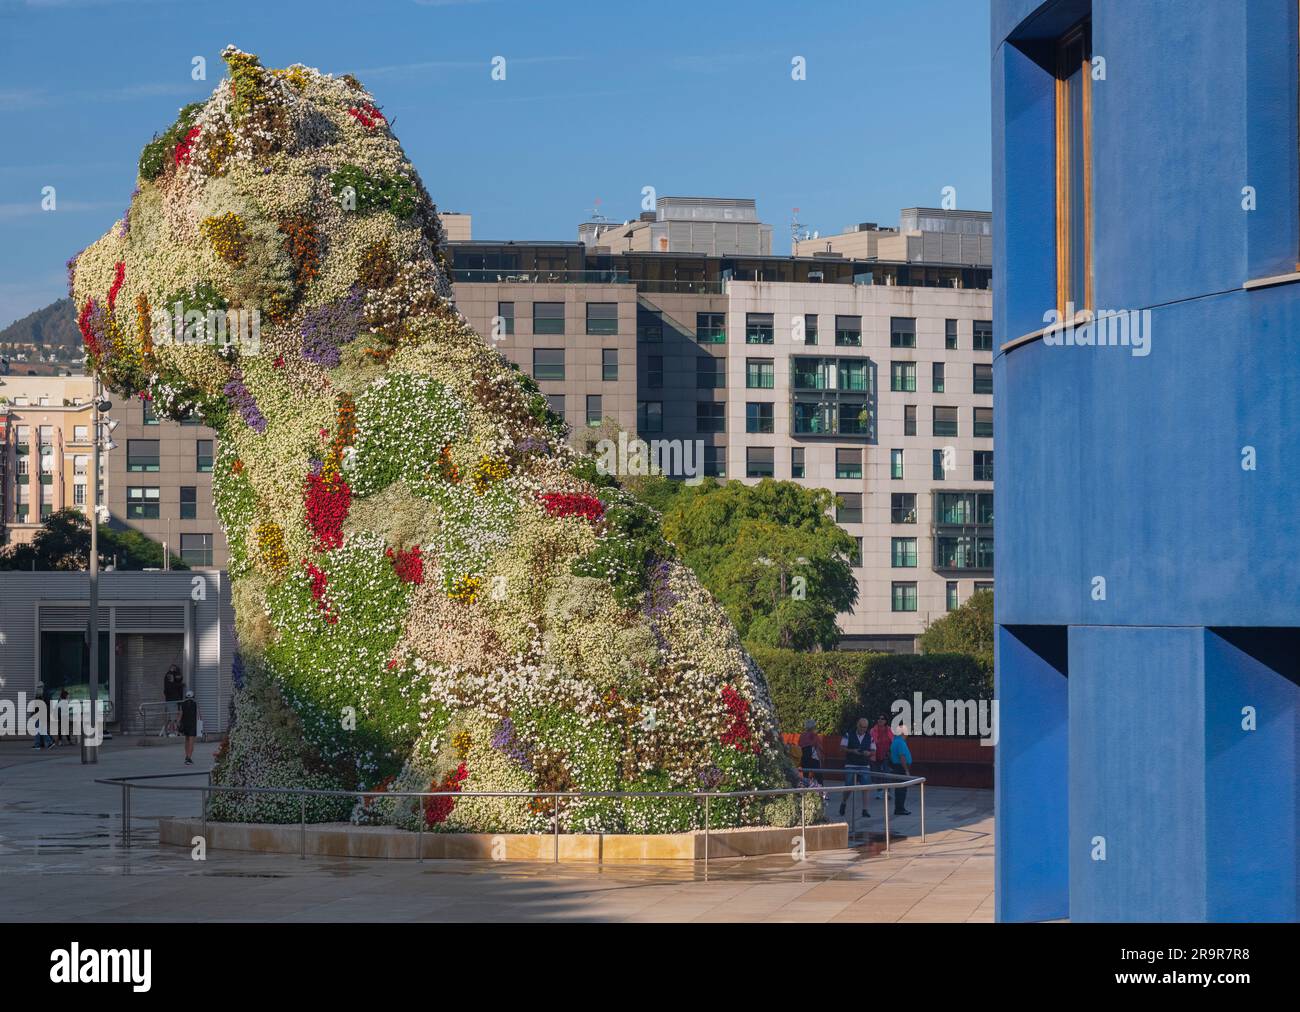 Spain, Basque Country, Bilbao, Guggenheim Museum area, Puppy which is a 12.4 metre tall flower covered sculpture of a west highland terrier by America Stock Photo